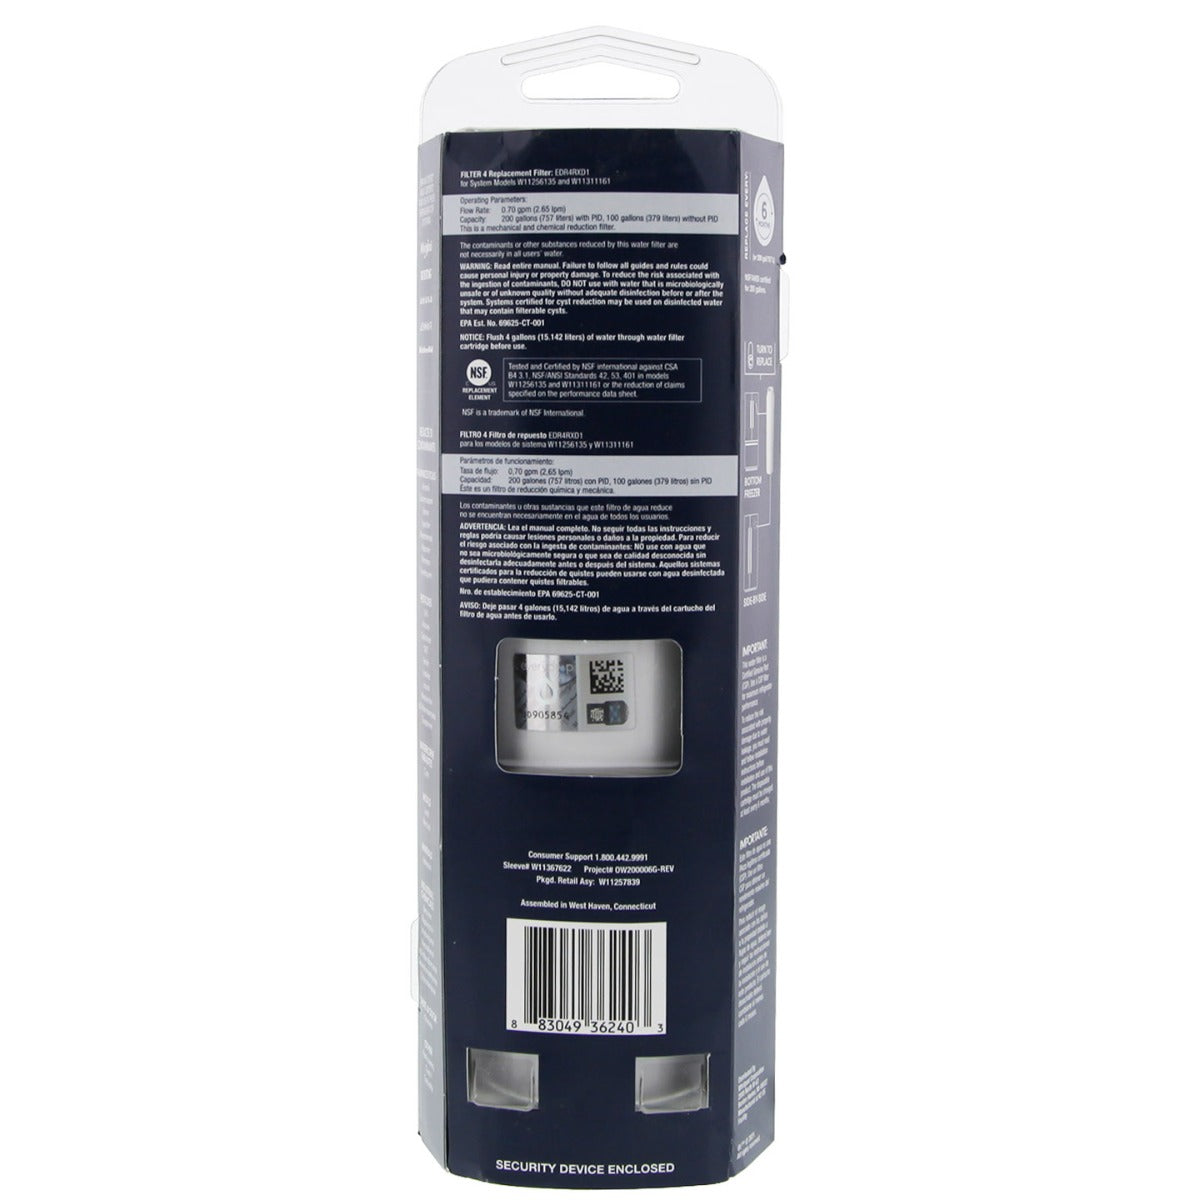 Whirlpool 4396395 and Maytag UKF8001 EveryDrop EDR4RXD1 (Filter 4) Ice and Water Refrigerator Filter